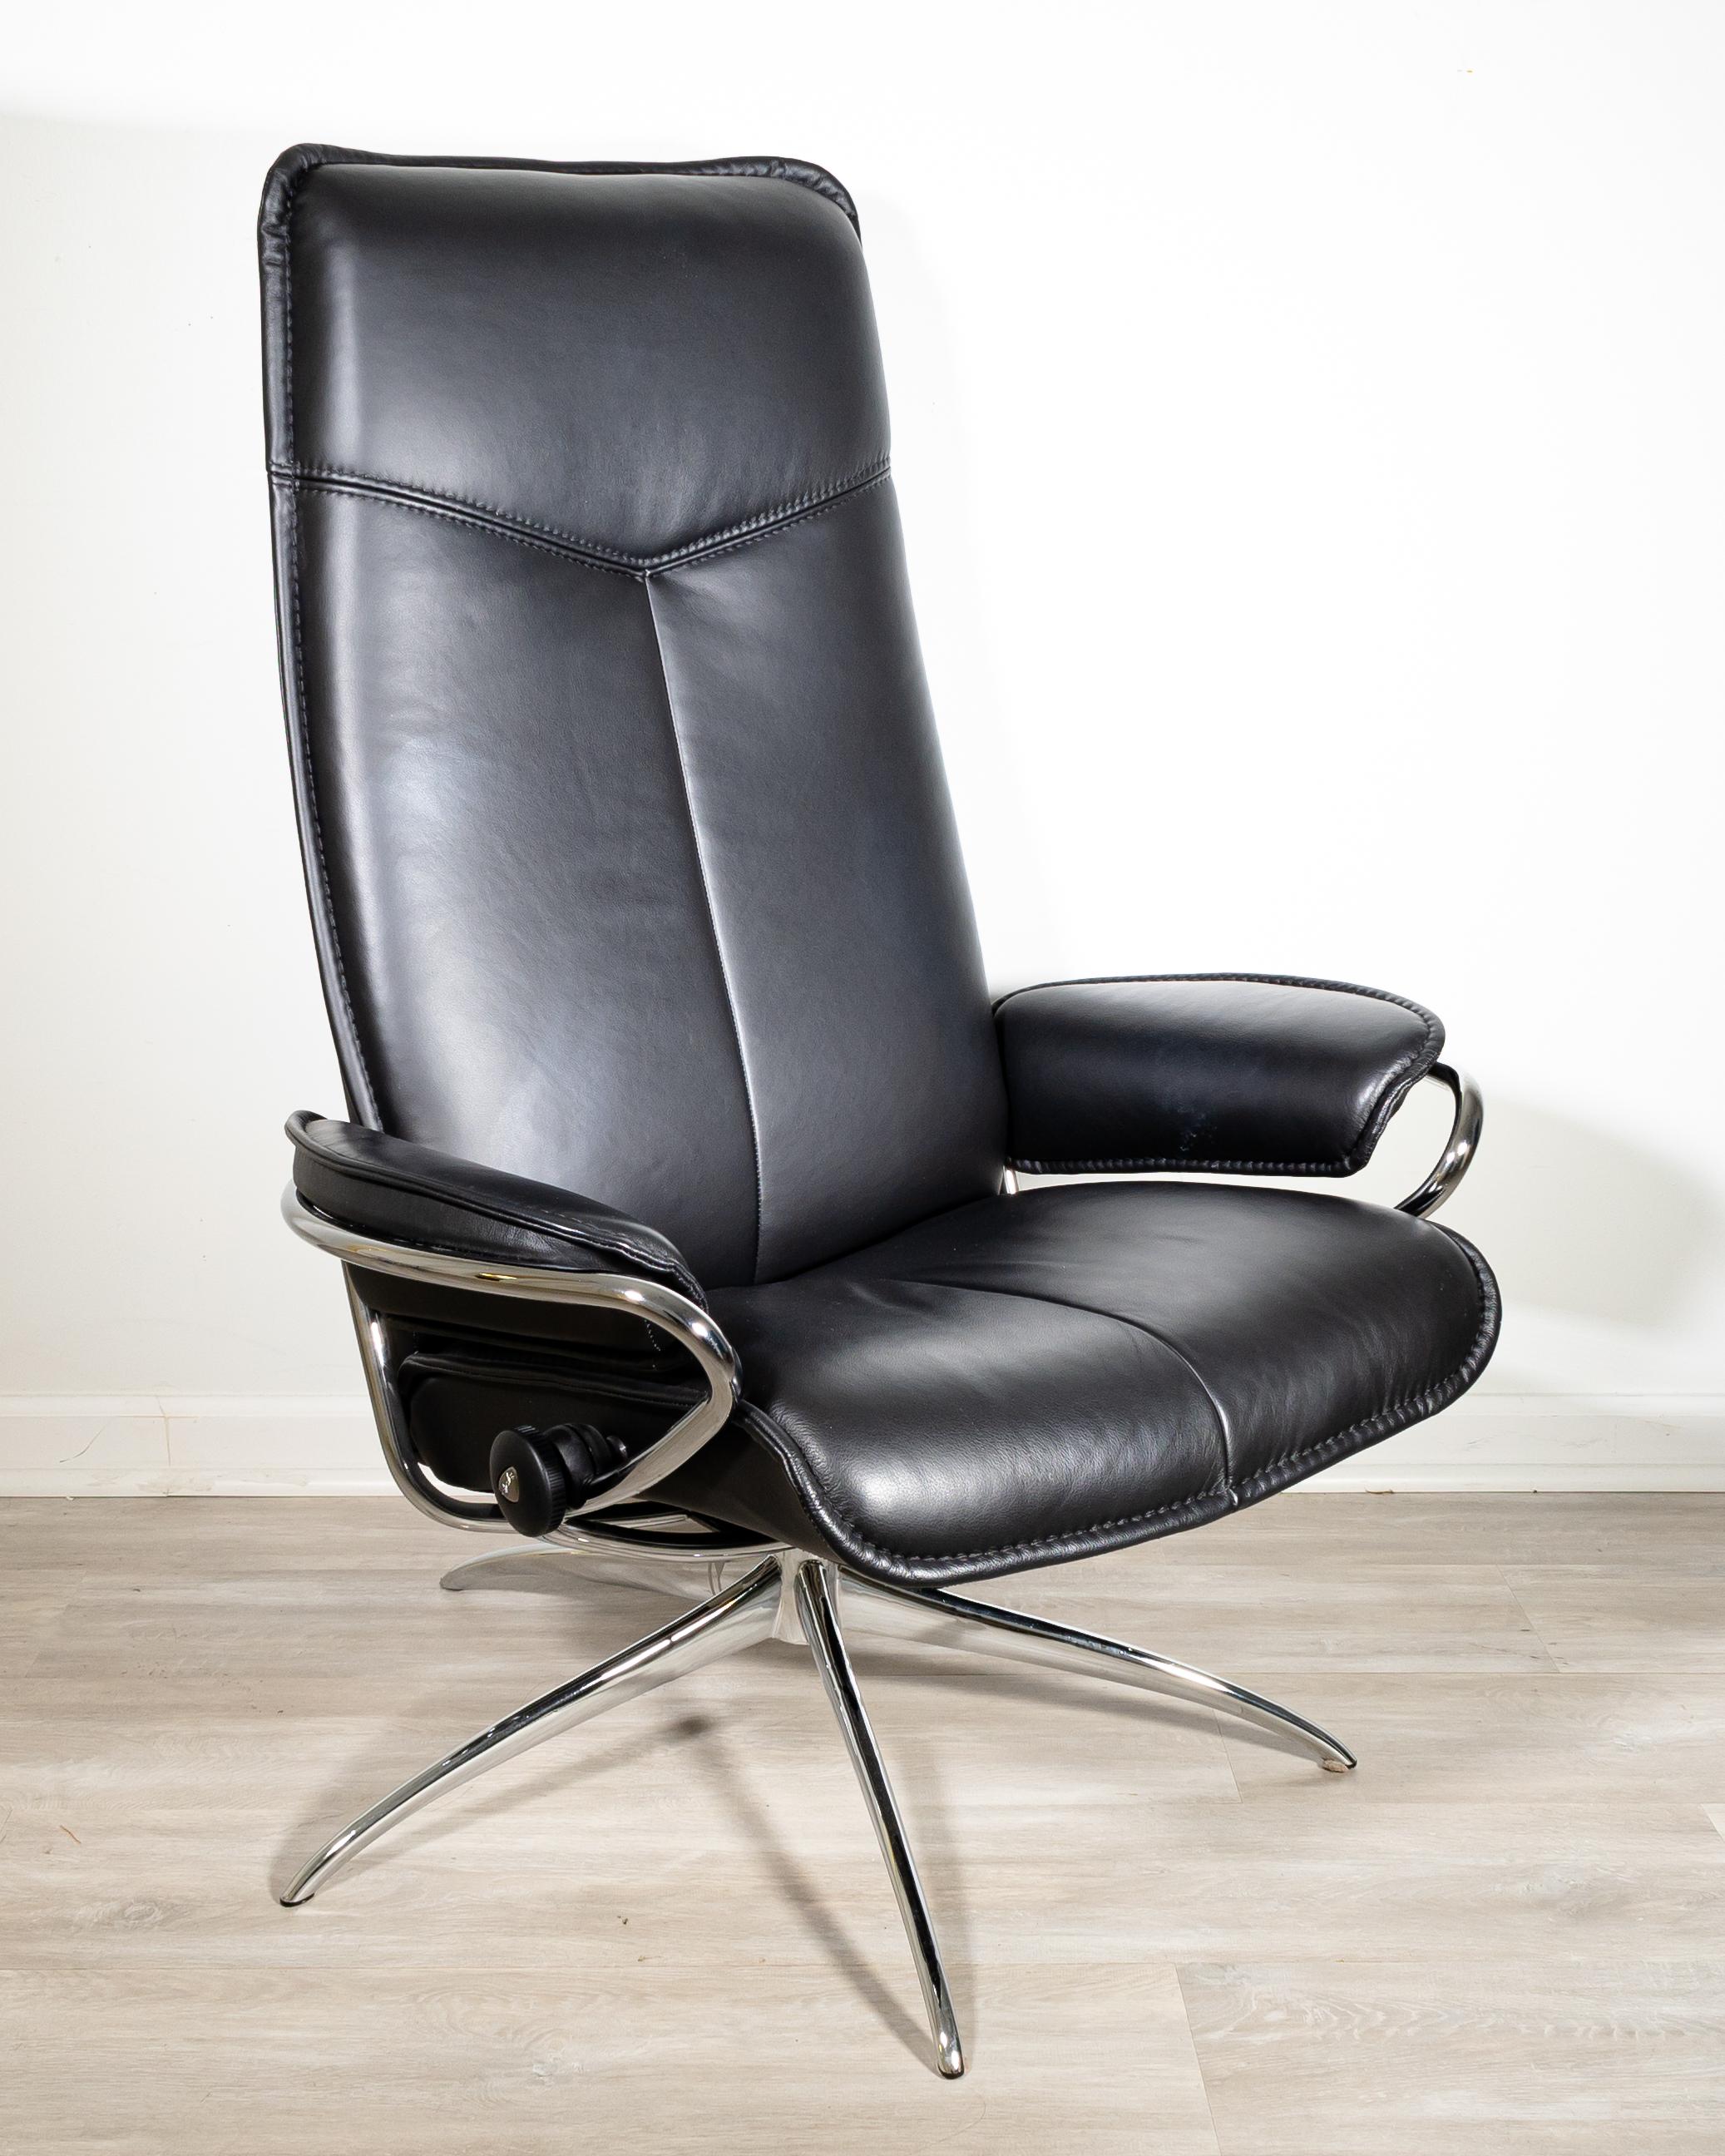 An Ekornes Stressless City High Back leather recliner and ottoman. A beautiful leather lounge chair from Ekornes sporting a slick black leather and chrome metal accents. This chair is made in Norway, and is in very good vintage condition. This chair